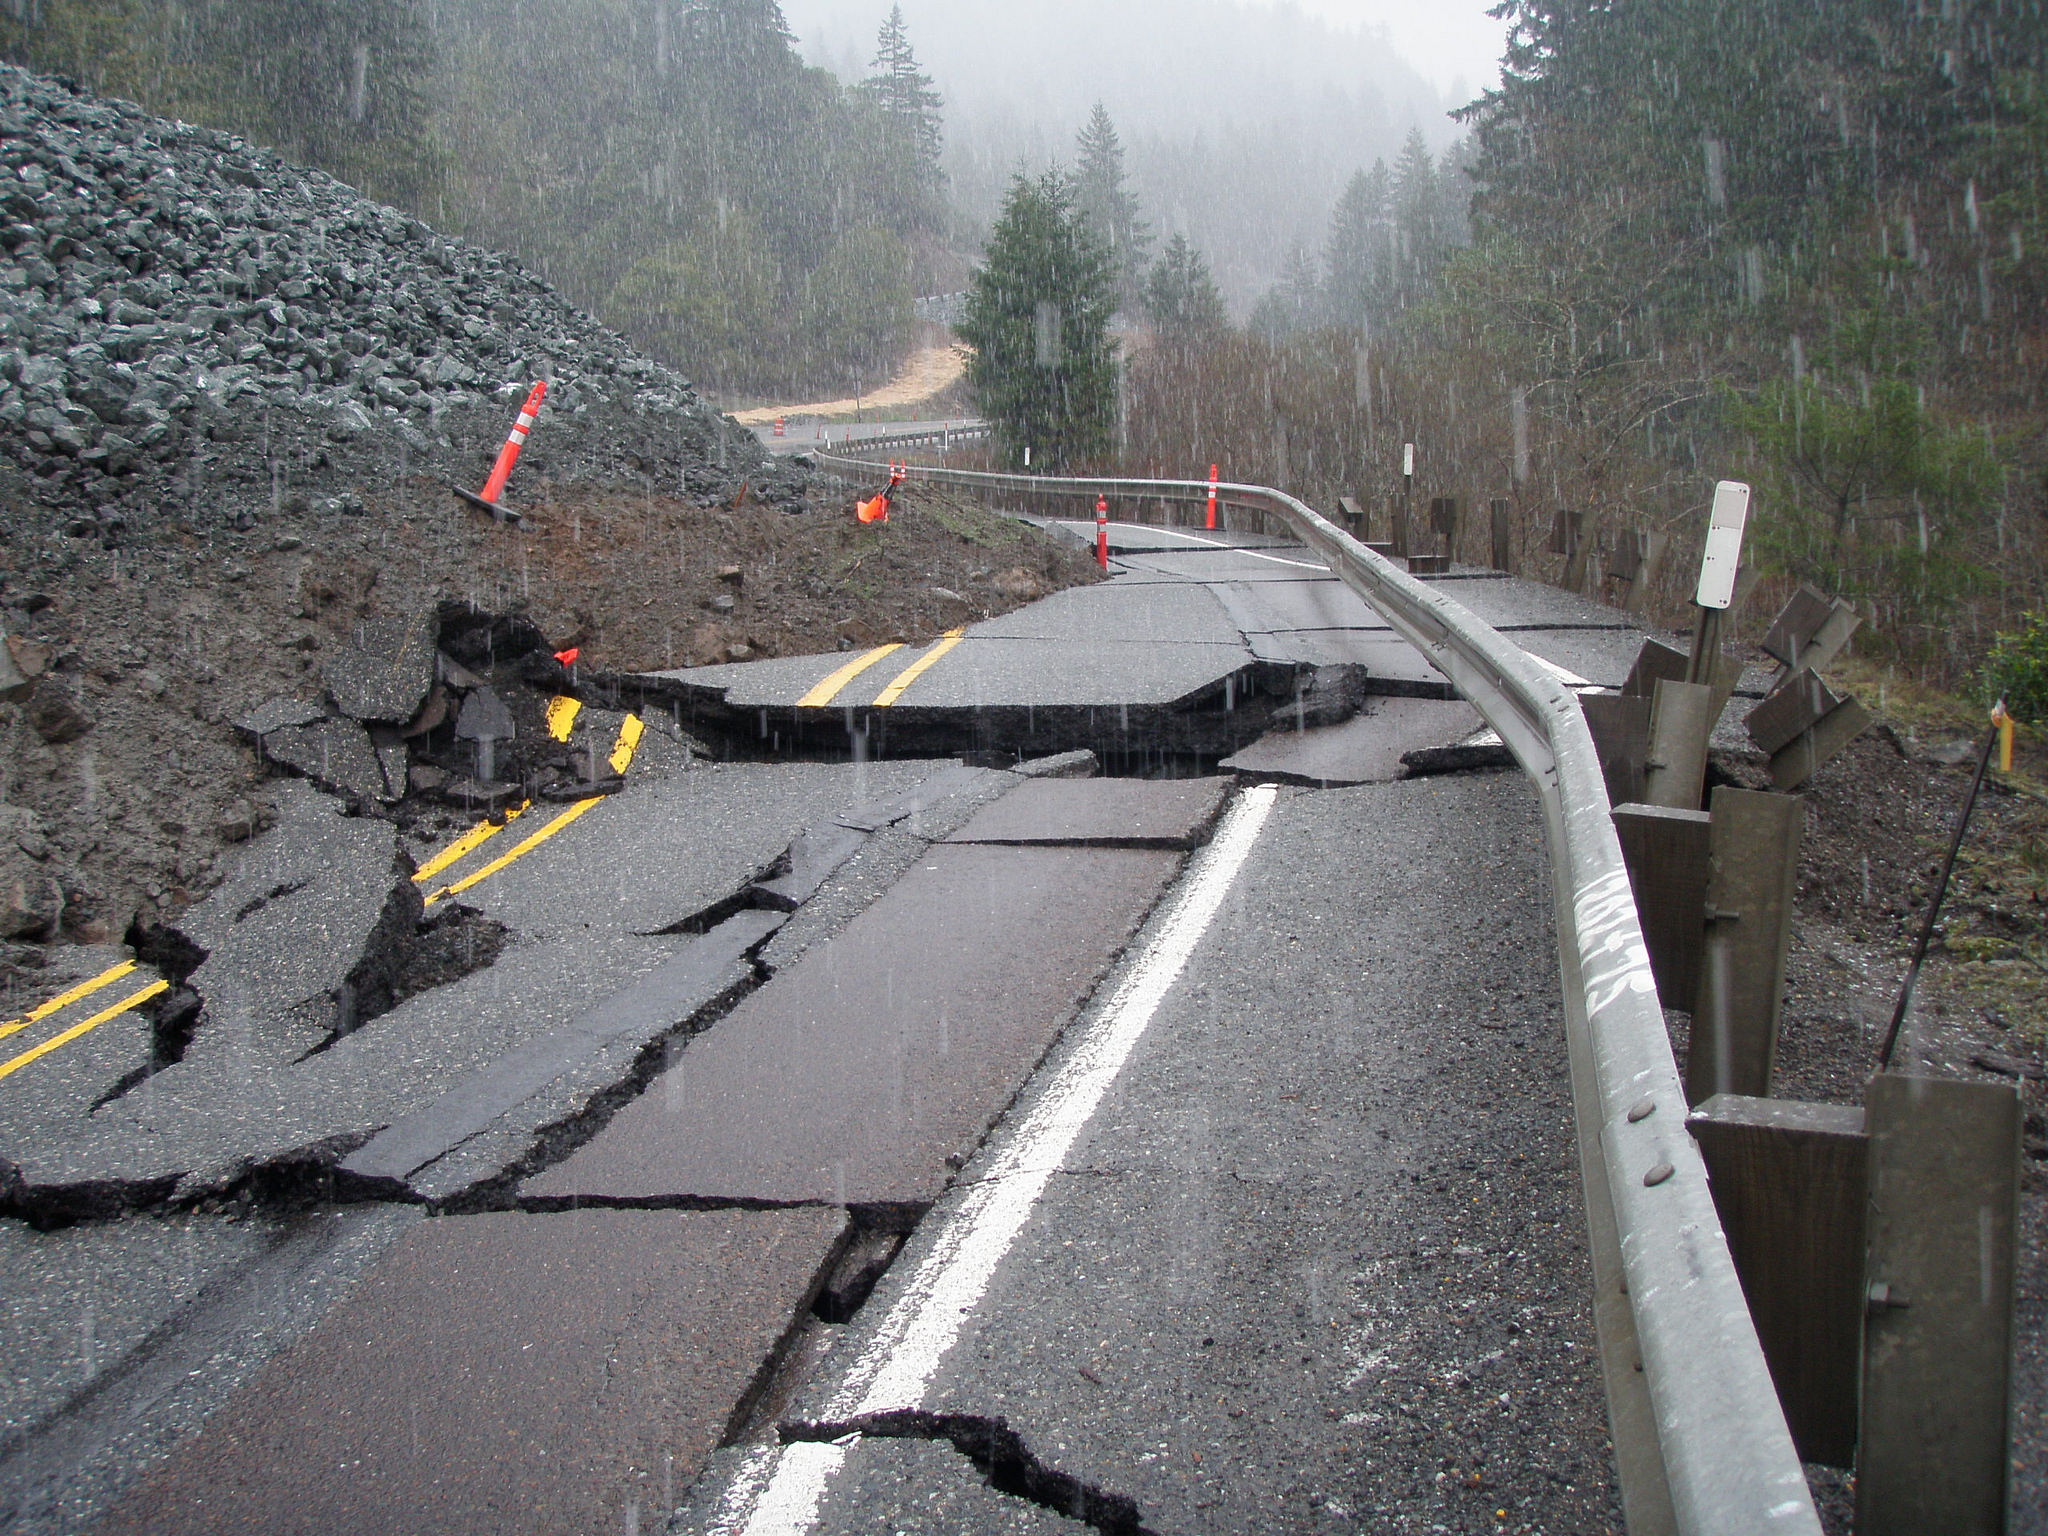 kgw.com | Landslide repairs on Highway 42 could cost $5 million2048 x 1536